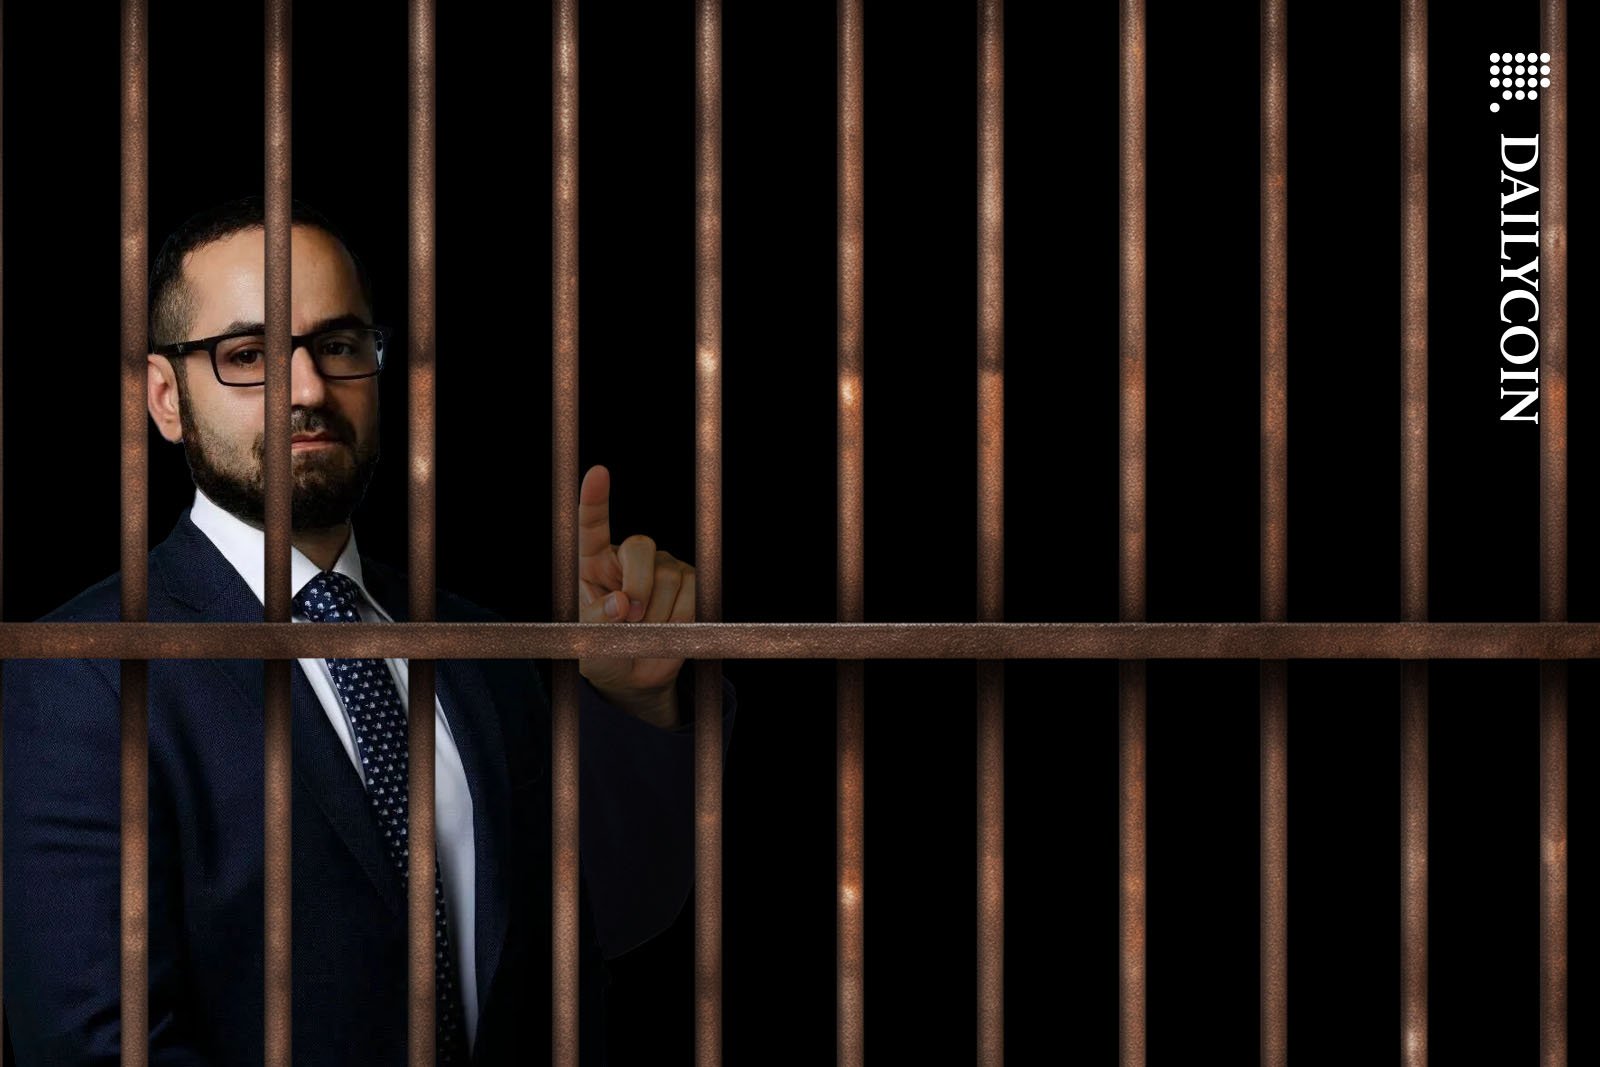 Tigran Gambaryan of Binance pointing a finger from a prison cell.